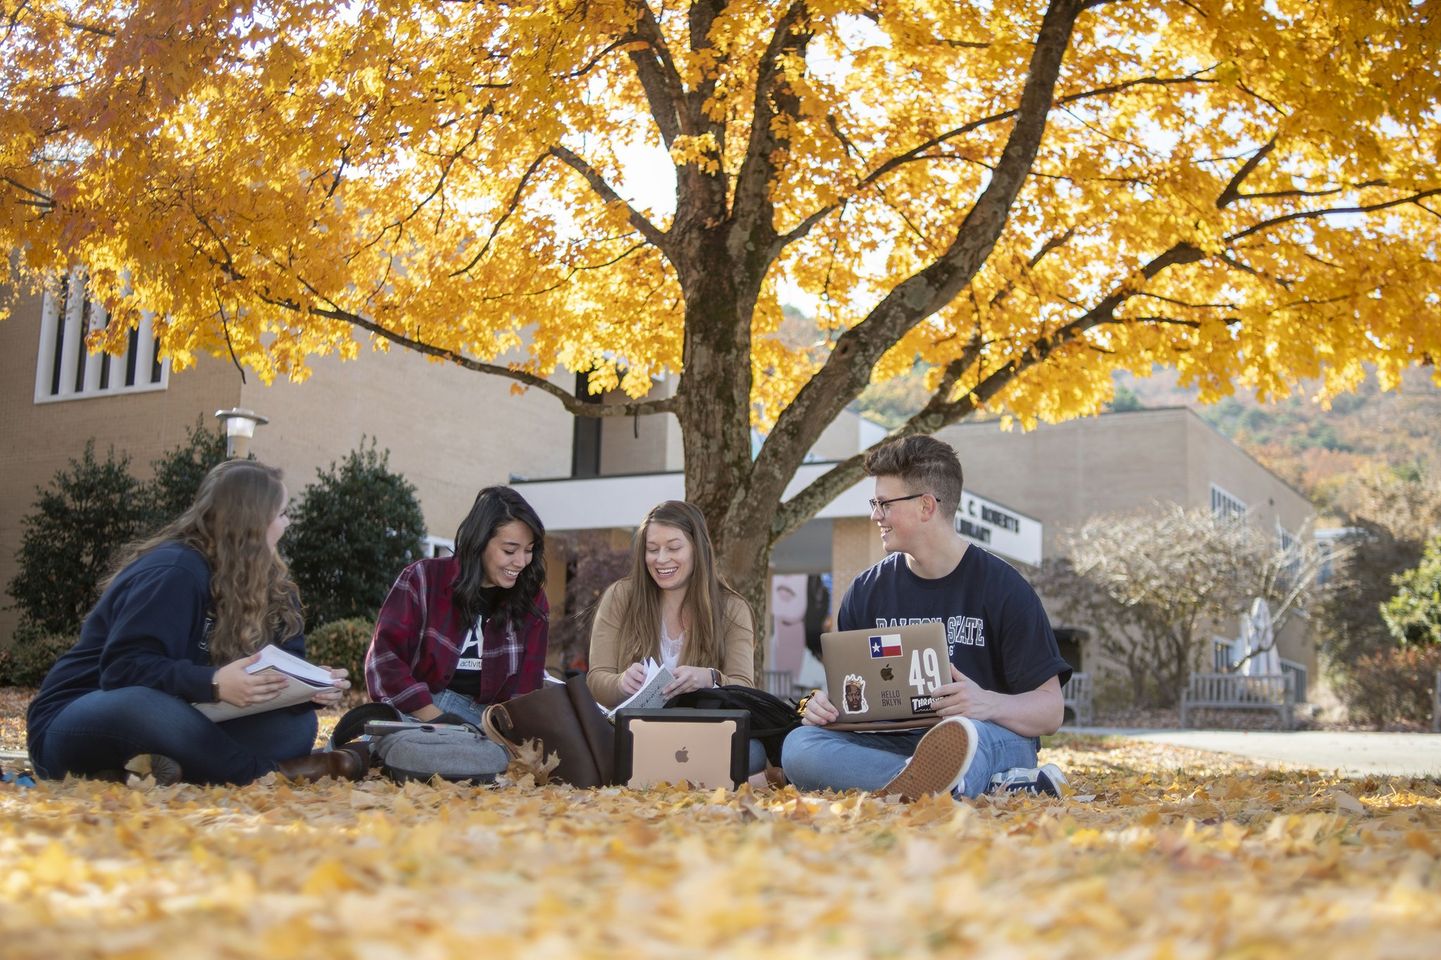 4 Students under the tree at Dalton State College